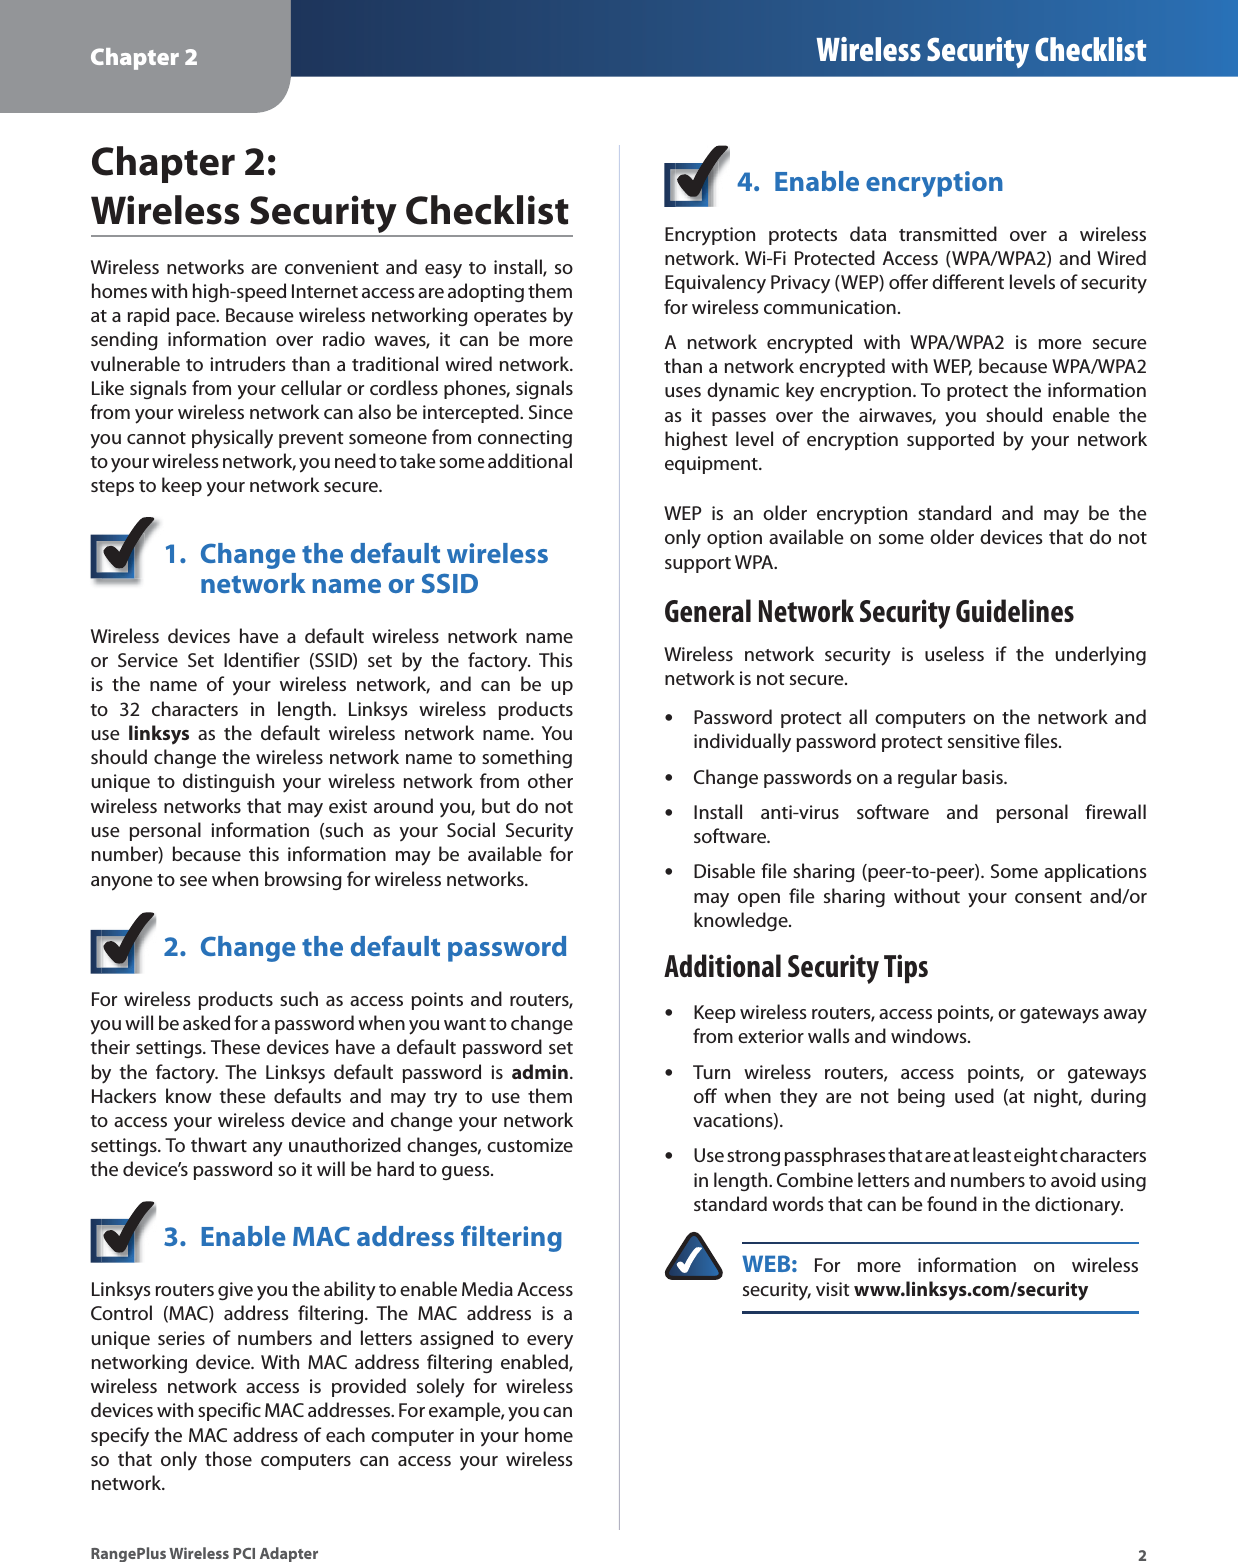 Chapter 2 Wireless Security Checklist2RangePlus Wireless PCI AdapterChapter 2:Wireless Security ChecklistWireless networks are convenient and easy to install, so homes with high-speed Internet access are adopting them at a rapid pace. Because wireless networking operates by sending information over radio waves, it can be more vulnerable to intruders than a traditional wired network. Like signals from your cellular or cordless phones, signals from your wireless network can also be intercepted. Since you cannot physically prevent someone from connecting to your wireless network, you need to take some additional steps to keep your network secure. 1. Change the default wireless network name or SSIDWireless devices have a default wireless network name or Service Set Identifier (SSID) set by the factory. This is the name of your wireless network, and can be up to 32 characters in length. Linksys wireless products use linksys as the default wireless network name. You should change the wireless network name to something unique to distinguish your wireless network from other wireless networks that may exist around you, but do not use personal information (such as your Social Security number) because this information may be available for anyone to see when browsing for wireless networks. 2. Change the default passwordFor wireless products such as access points and routers, you will be asked for a password when you want to change their settings. These devices have a default password set by the factory. The Linksys default password is admin.Hackers know these defaults and may try to use them to access your wireless device and change your network settings. To thwart any unauthorized changes, customize the device’s password so it will be hard to guess.3. Enable MAC address filteringLinksys routers give you the ability to enable Media Access Control (MAC) address filtering. The MAC address is a unique series of numbers and letters assigned to every networking device. With MAC address filtering enabled, wireless network access is provided solely for wireless devices with specific MAC addresses. For example, you can specify the MAC address of each computer in your home so that only those computers can access your wireless network. 4. Enable encryptionEncryption protects data transmitted over a wireless network. Wi-Fi Protected Access (WPA/WPA2) and Wired Equivalency Privacy (WEP) offer different levels of security for wireless communication.A network encrypted with WPA/WPA2 is more secure than a network encrypted with WEP, because WPA/WPA2 uses dynamic key encryption. To protect the information as it passes over the airwaves, you should enable the highest level of encryption supported by your network equipment. WEP is an older encryption standard and may be the only option available on some older devices that do not support WPA.General Network Security GuidelinesWireless network security is useless if the underlying network is not secure. Password protect all computers on the network and individually password protect sensitive files.Change passwords on a regular basis.Install anti-virus software and personal firewall software.Disable file sharing (peer-to-peer). Some applications may open file sharing without your consent and/or knowledge.Additional Security TipsKeep wireless routers, access points, or gateways away from exterior walls and windows.Turn wireless routers, access points, or gateways off when they are not being used (at night, during vacations).Use strong passphrases that are at least eight characters in length. Combine letters and numbers to avoid using standard words that can be found in the dictionary. WEB: For more information on wireless security, visit www.linksys.com/security•••••••